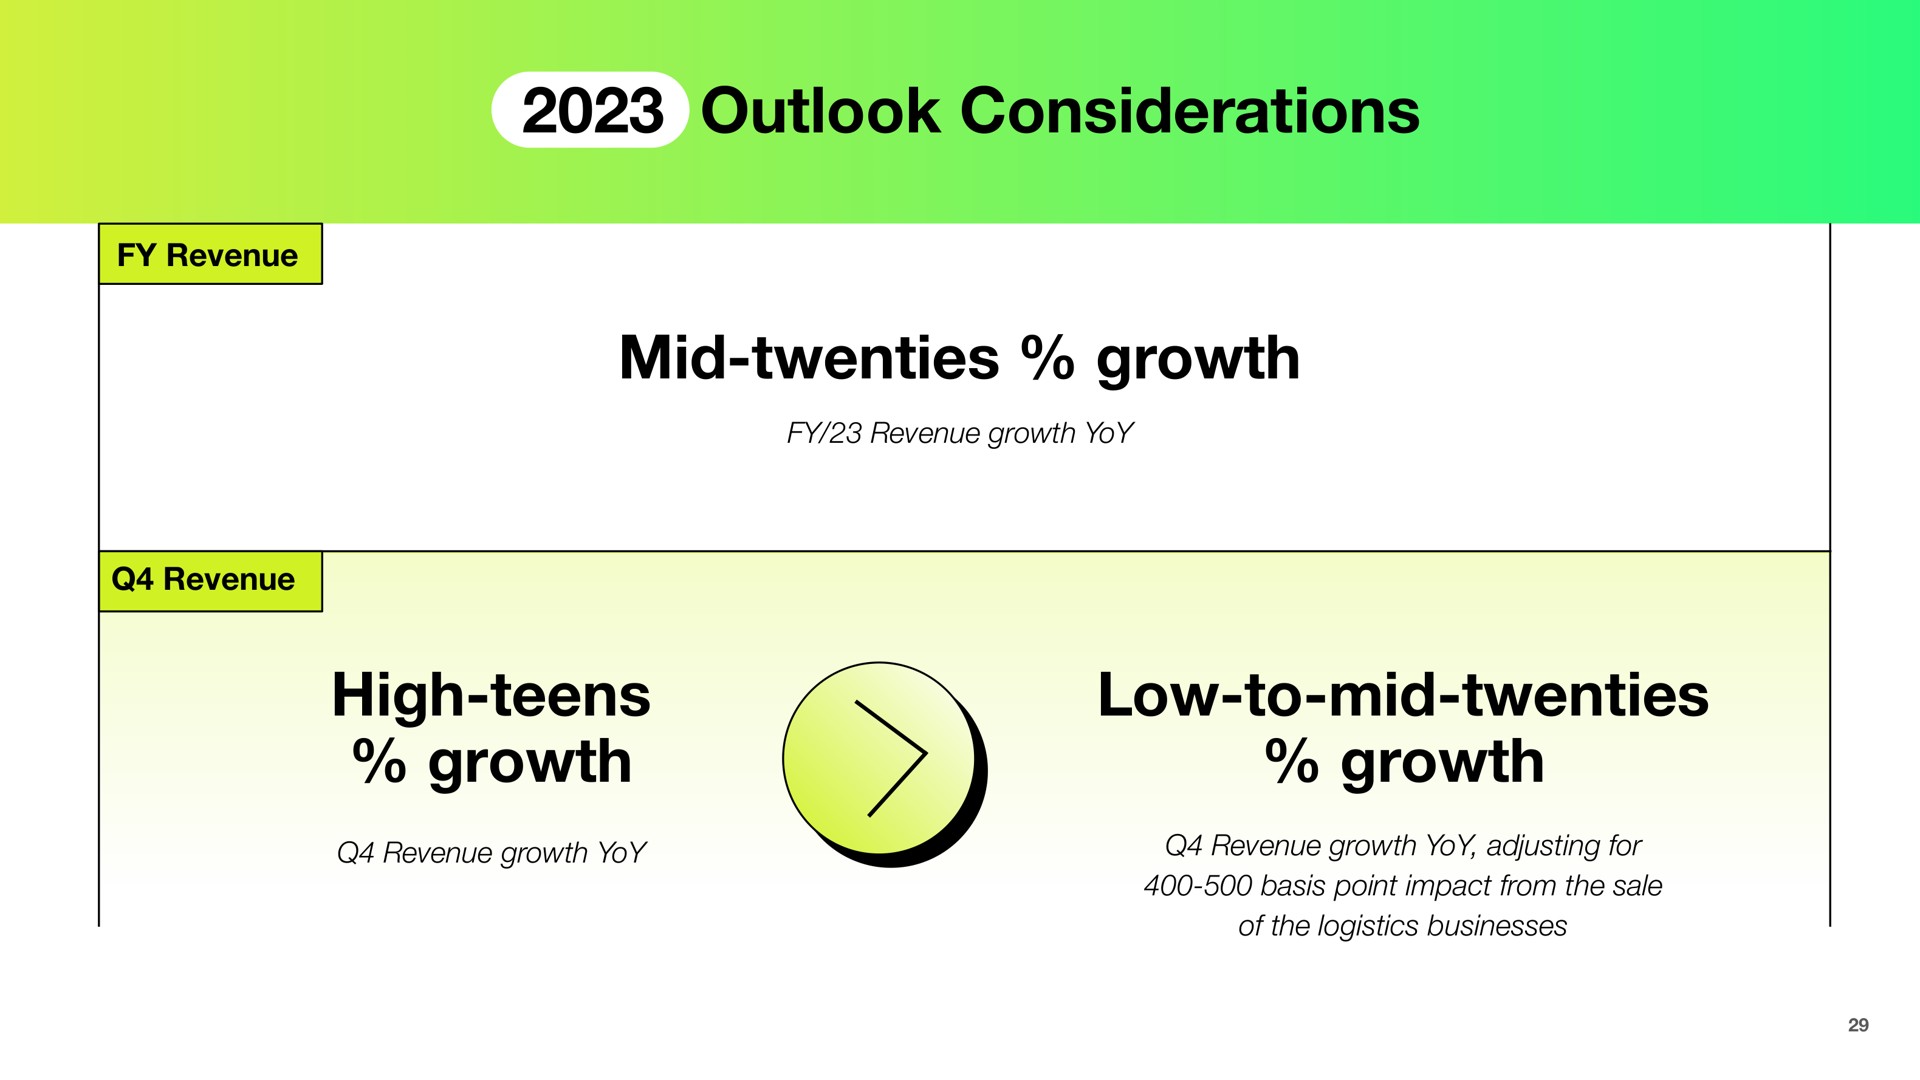 outlook considerations mid twenties growth high teens growth low to mid twenties growth | Shopify